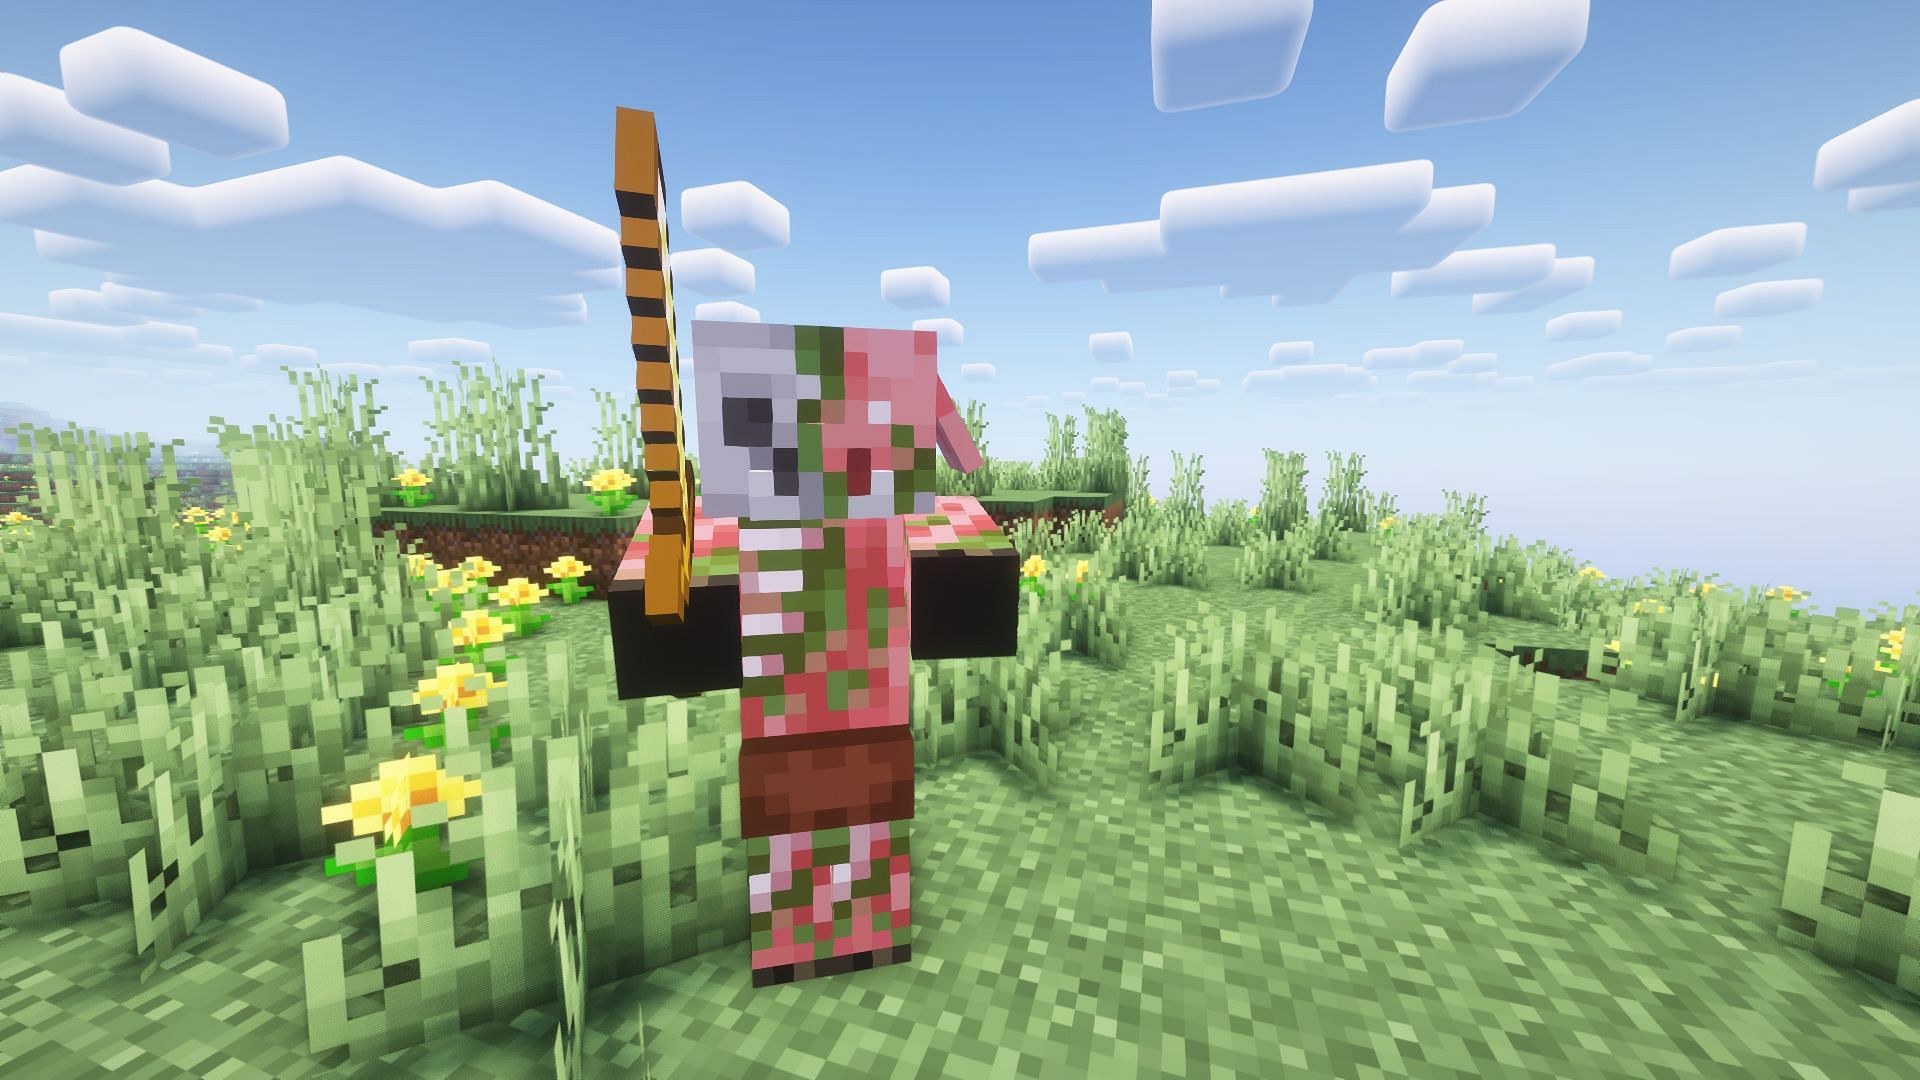 A Minecraft Redditor spots a zombified piglin right after they create a new world (Image via Mojang)